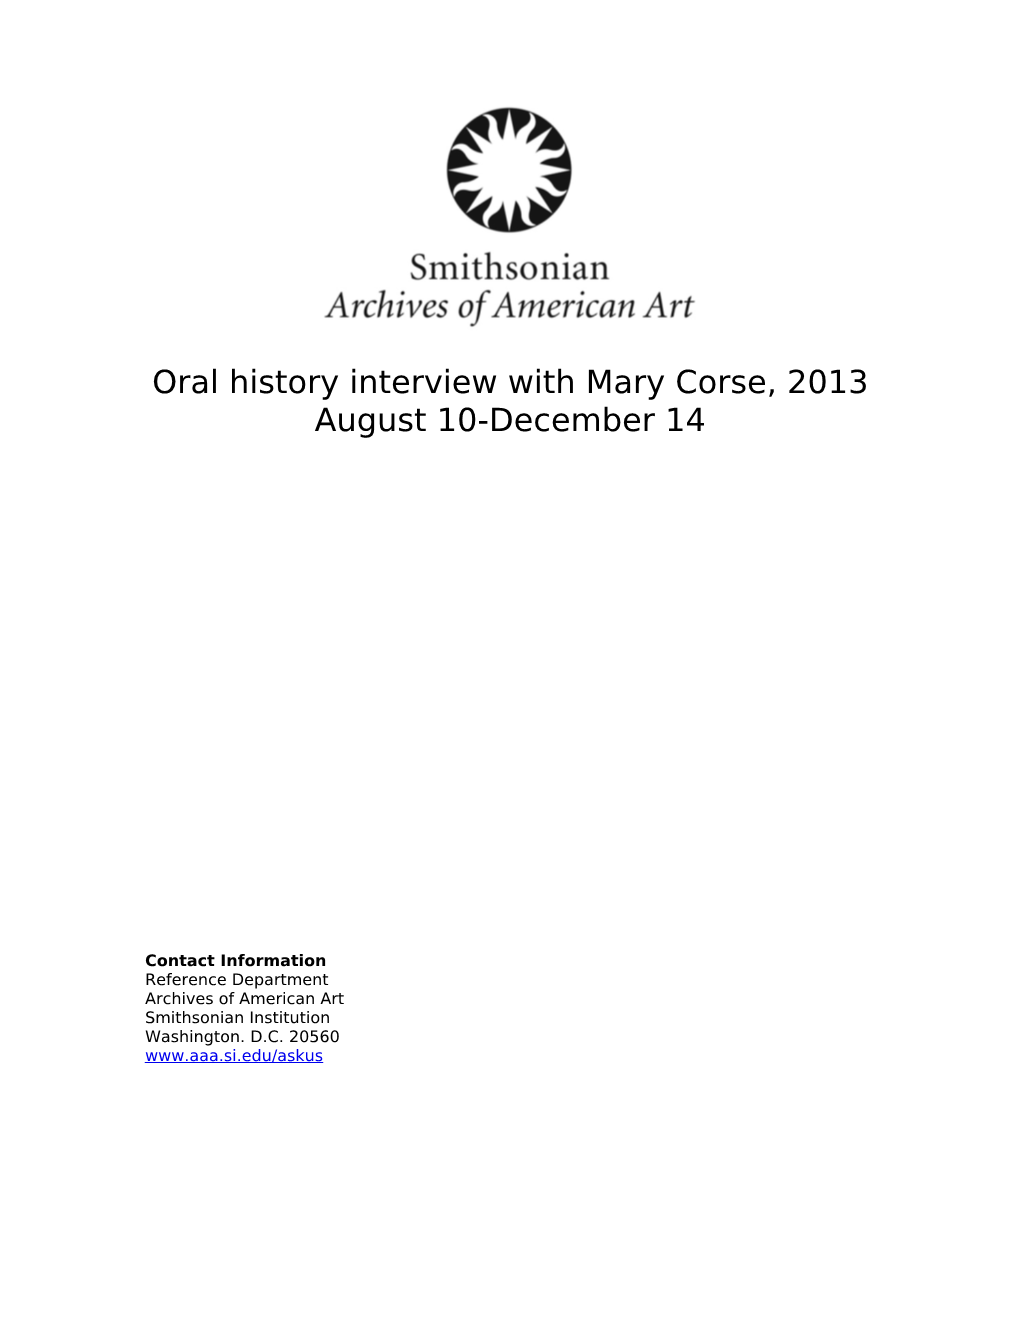 Oral History Interview with Mary Corse, 2013 August 10-December 14